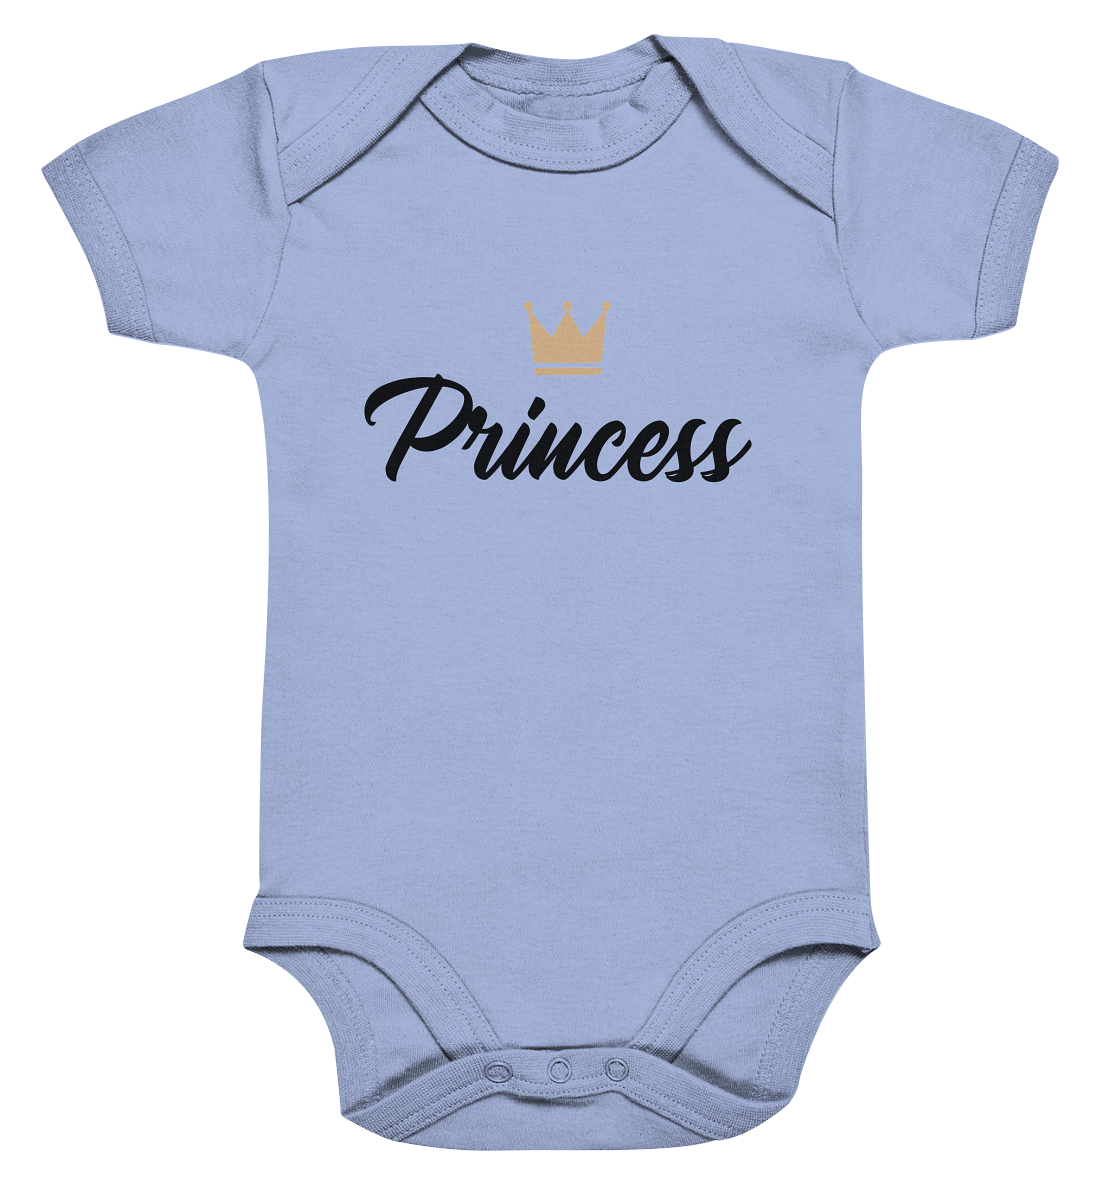 Princess Baby Bodysuite Familienoutfit King, Queen und Princess Bloominic